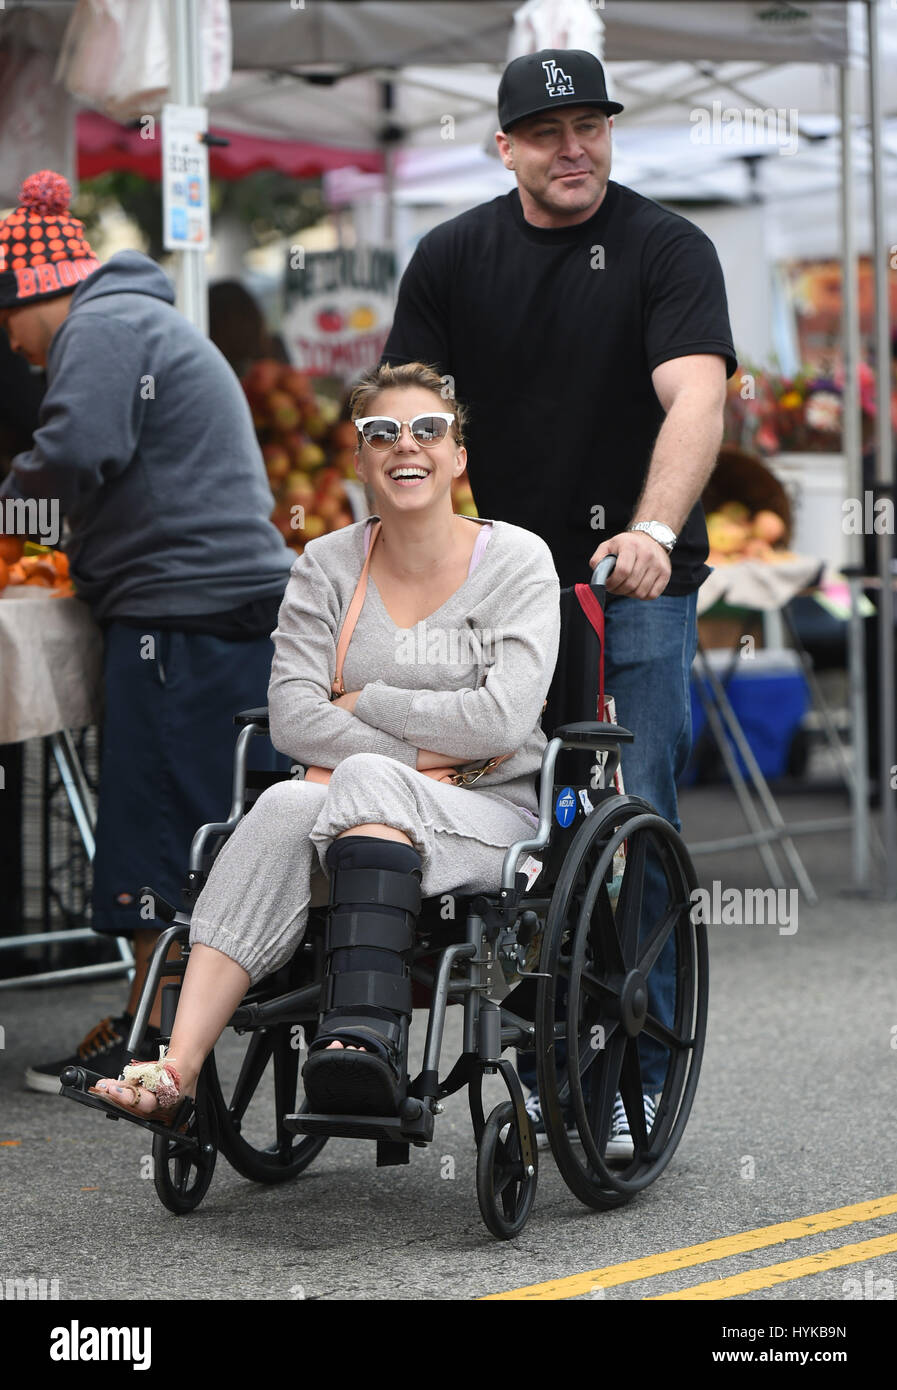 band Staat strottenhoofd Jodie Sweetin, with a broken leg, is pushed in her wheelchair by her fiance  Justin Hodak at a farmer's market over the weekend Featuring: Jodie Sweetin,  Justin Hodak Where: Los Angeles, California,